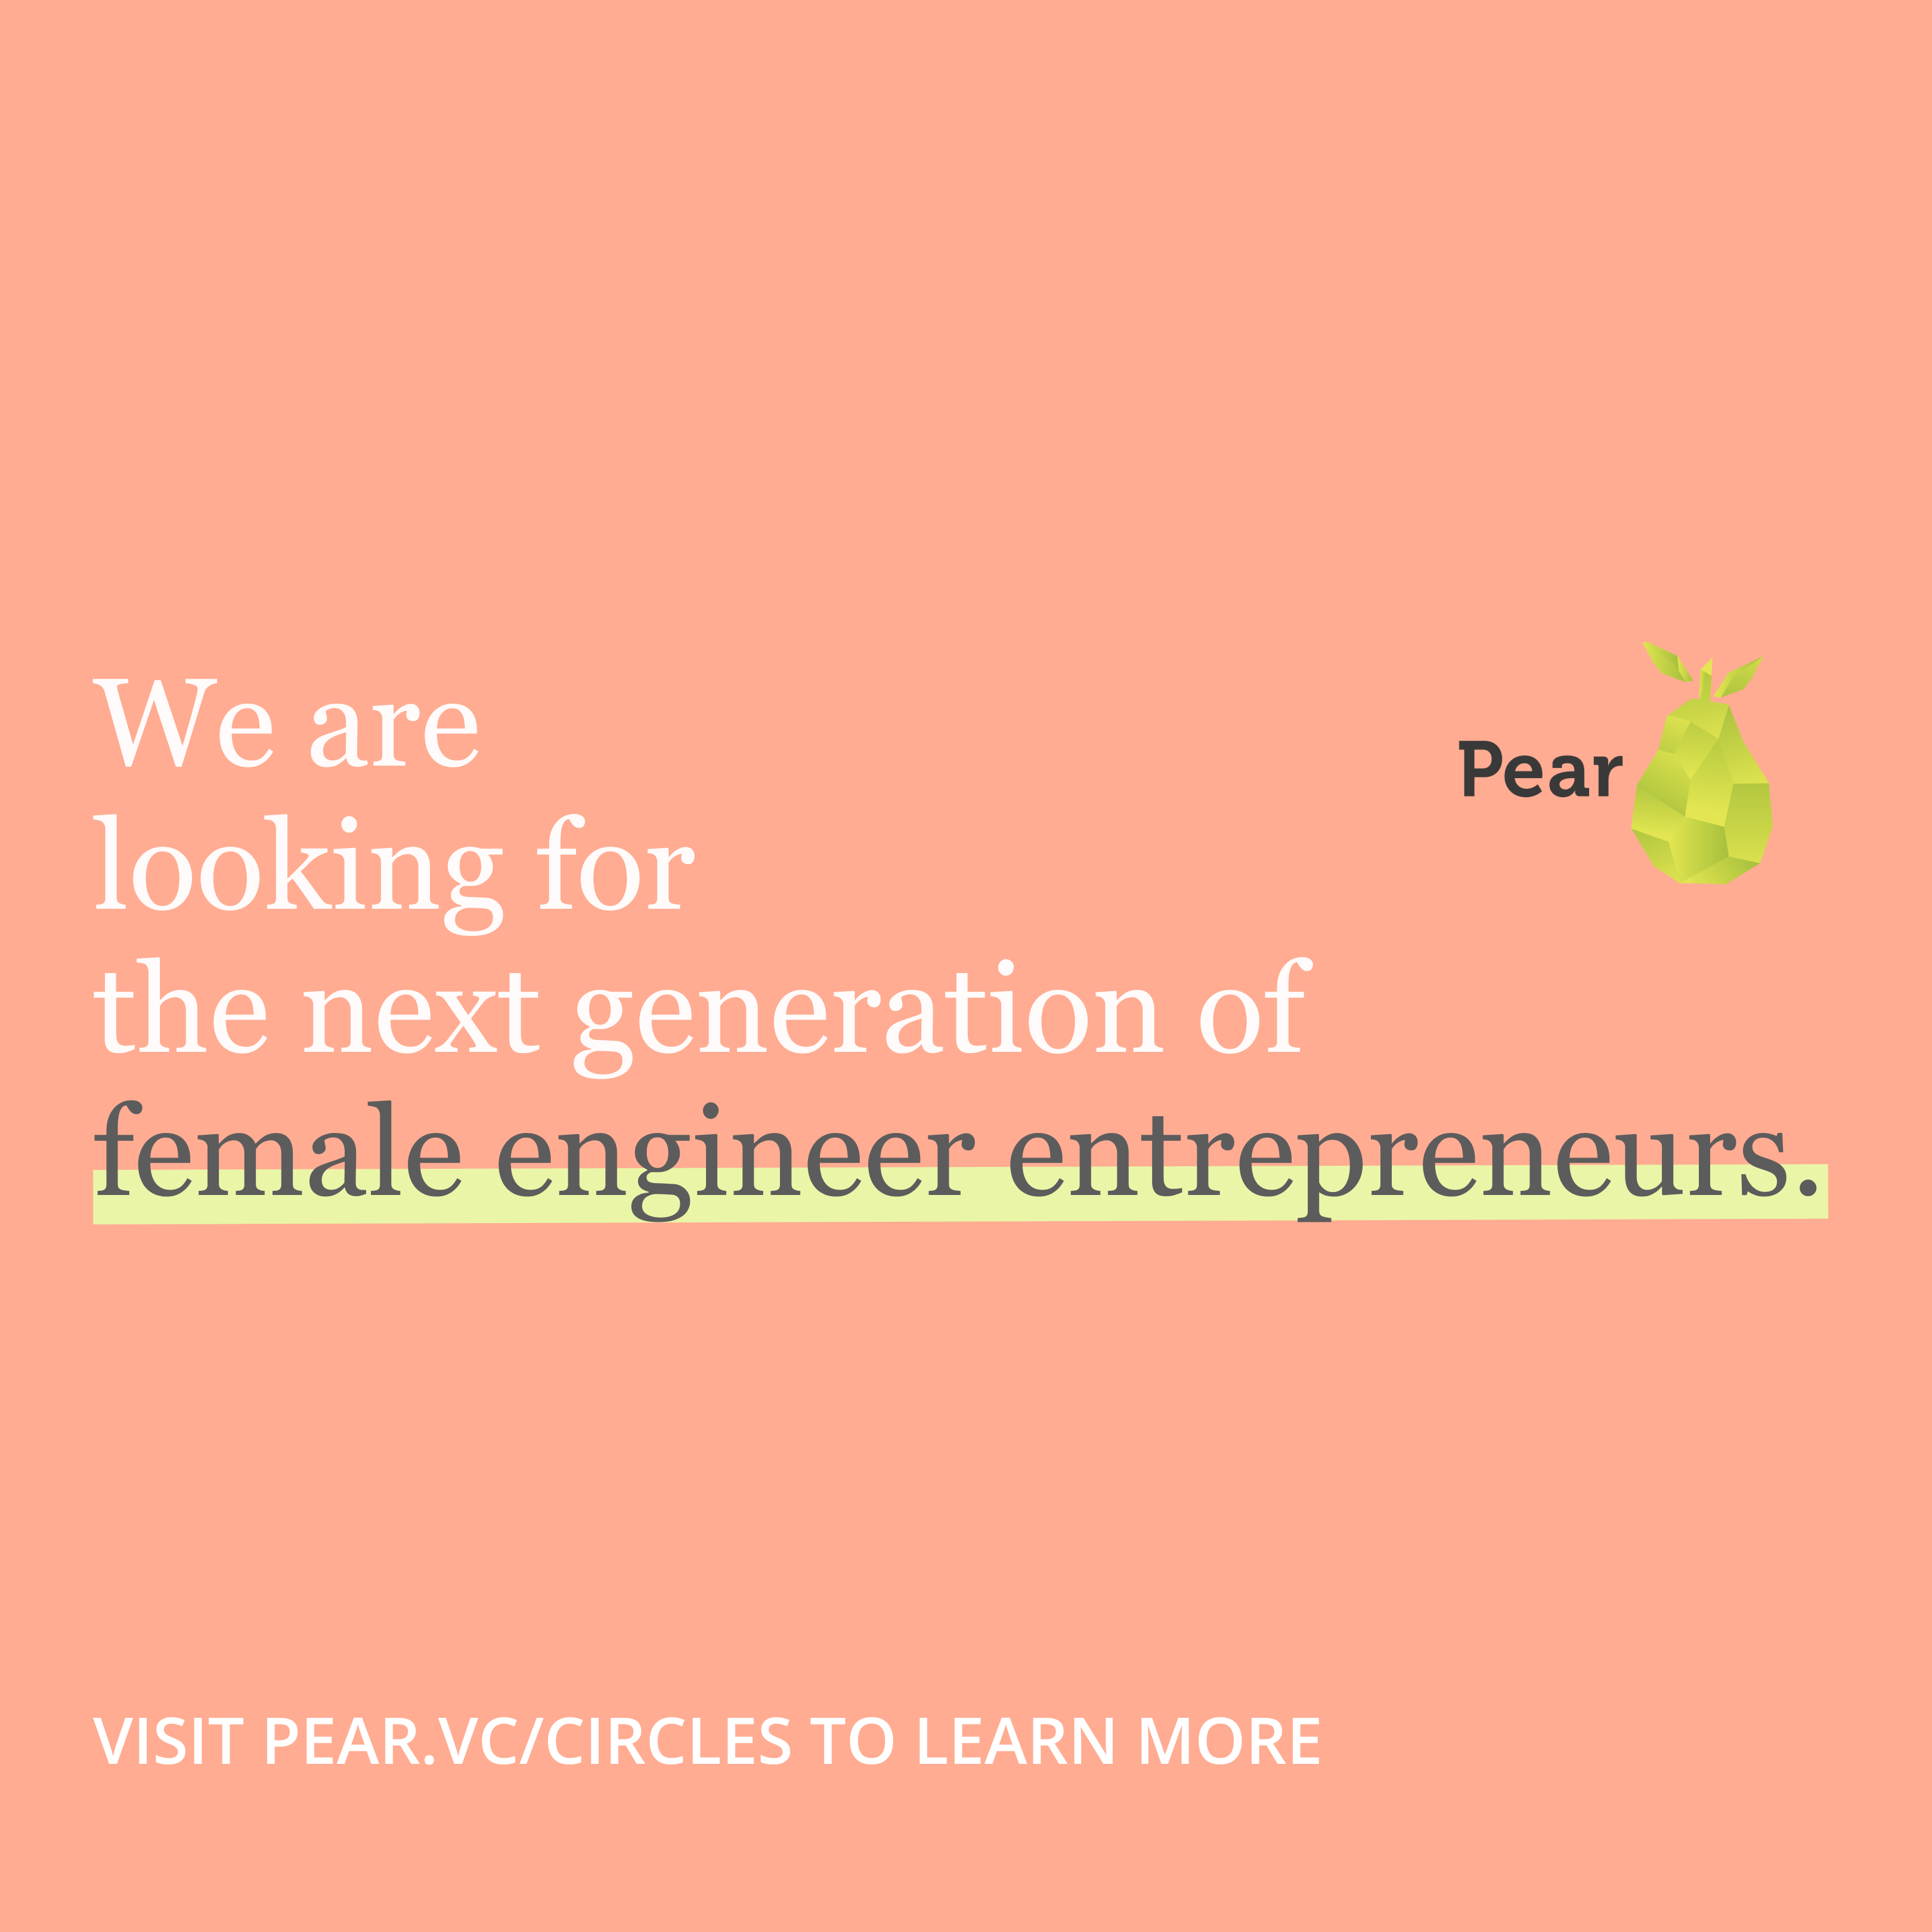 Apply to Pear Founder Circles for Female Engineers